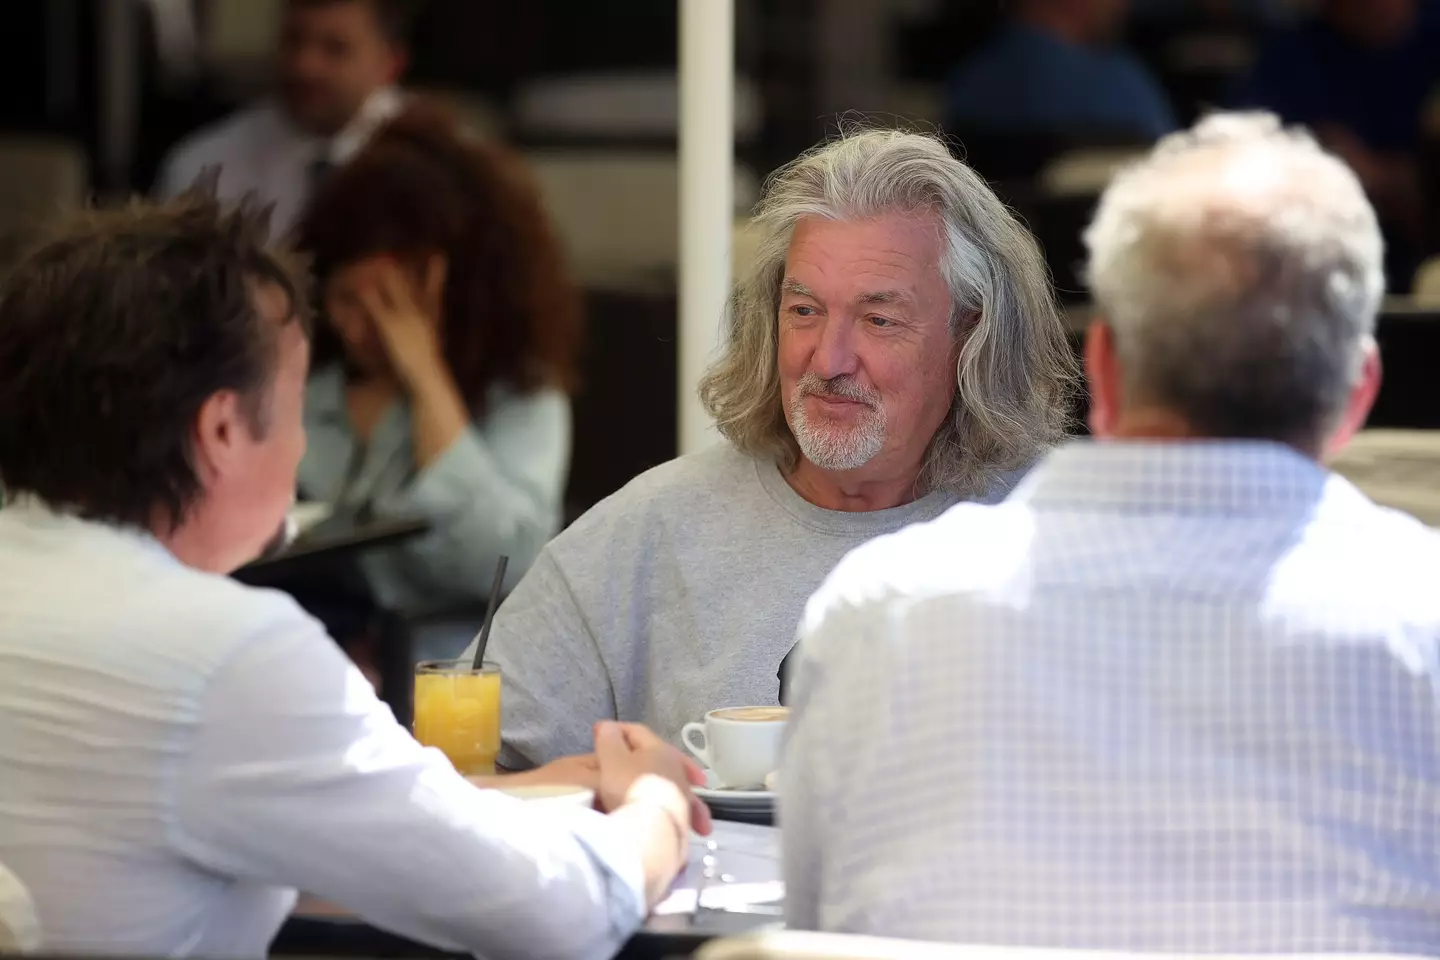 James May has been filming Our Man in Italy for Amazon Prime Video.